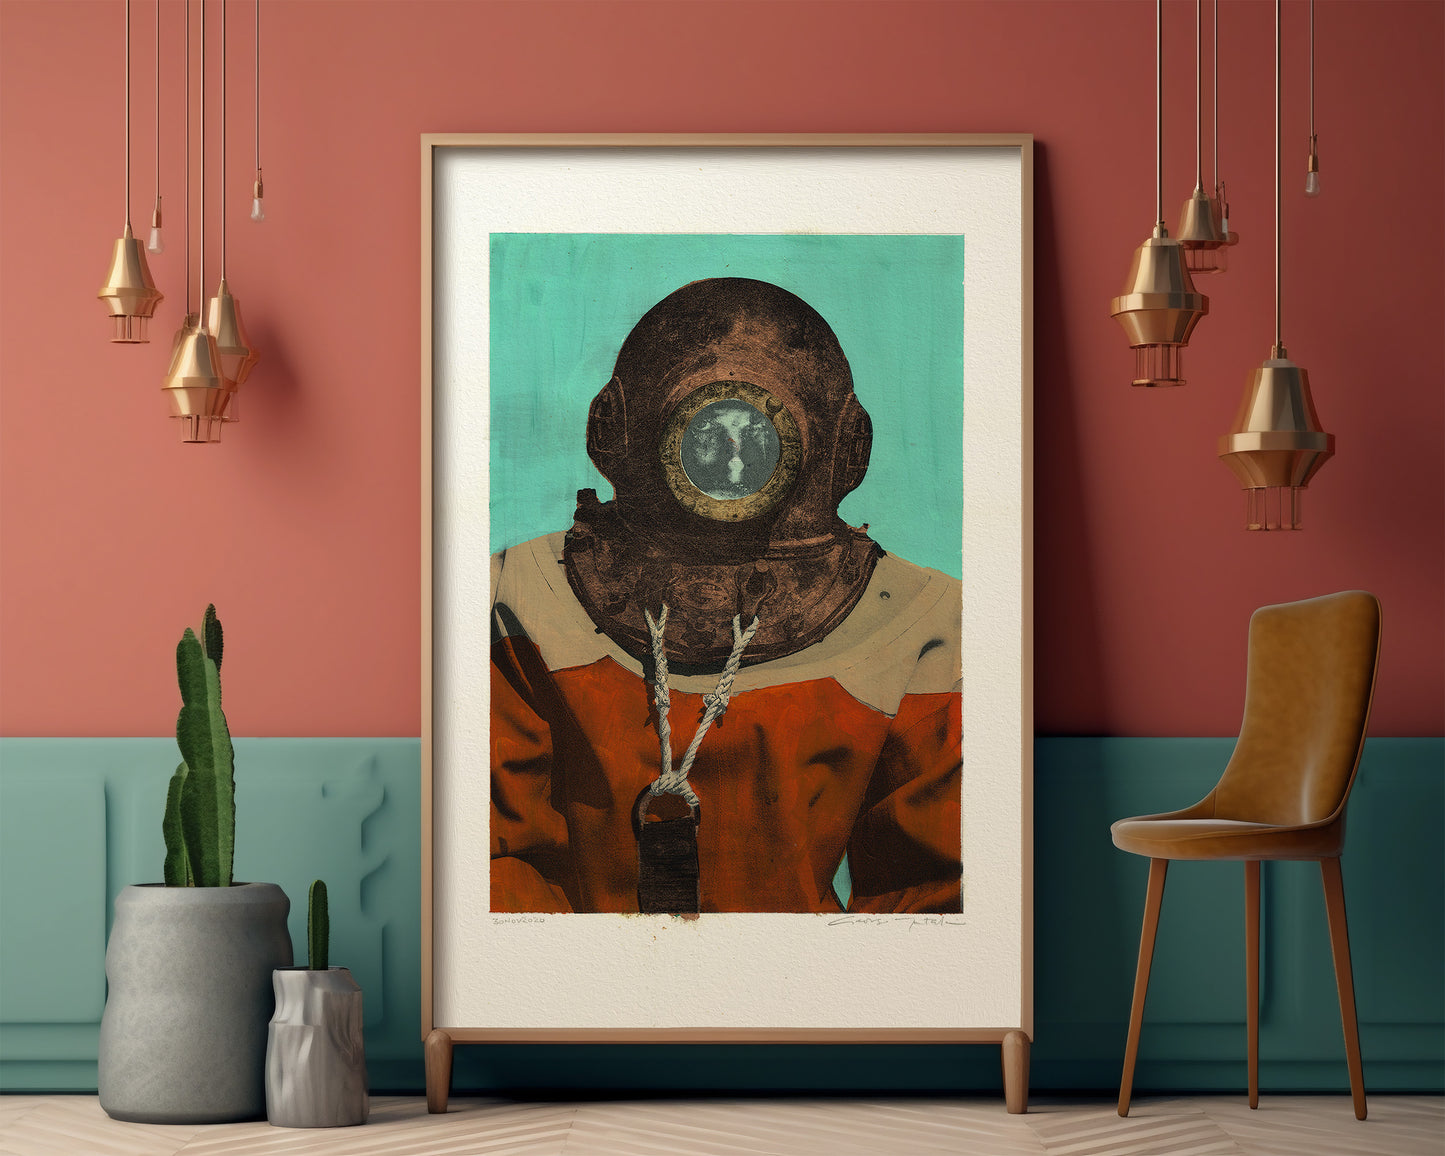 Painting Pop Art Wall Art from Greece | Flat Turquoise sponge diver from Kalymnos island, by George Tatakis - inside an eclectic room